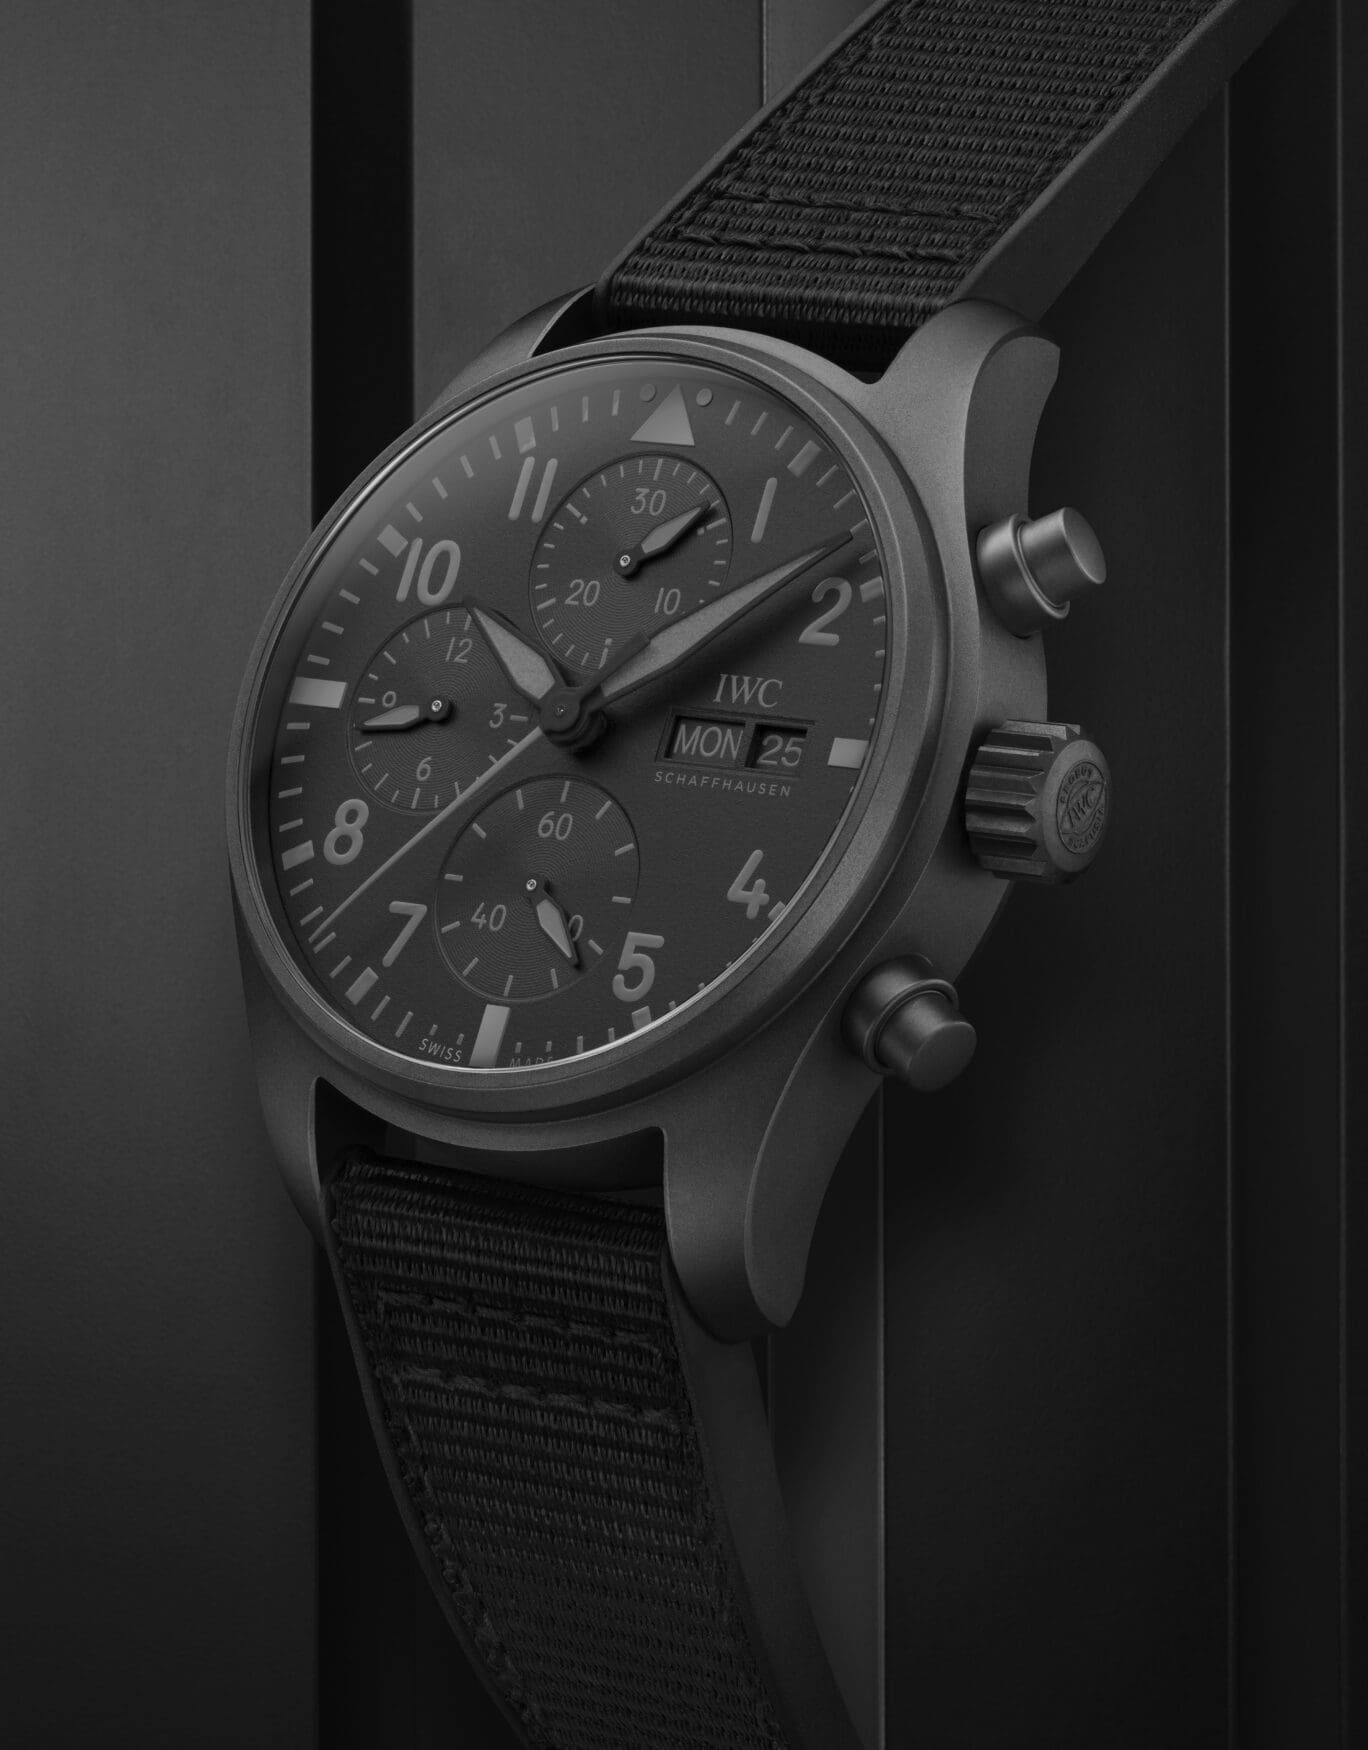 WATCHES & WONDERS: The IWC Pilot’s Watch Chronograph Top Gun collection expands